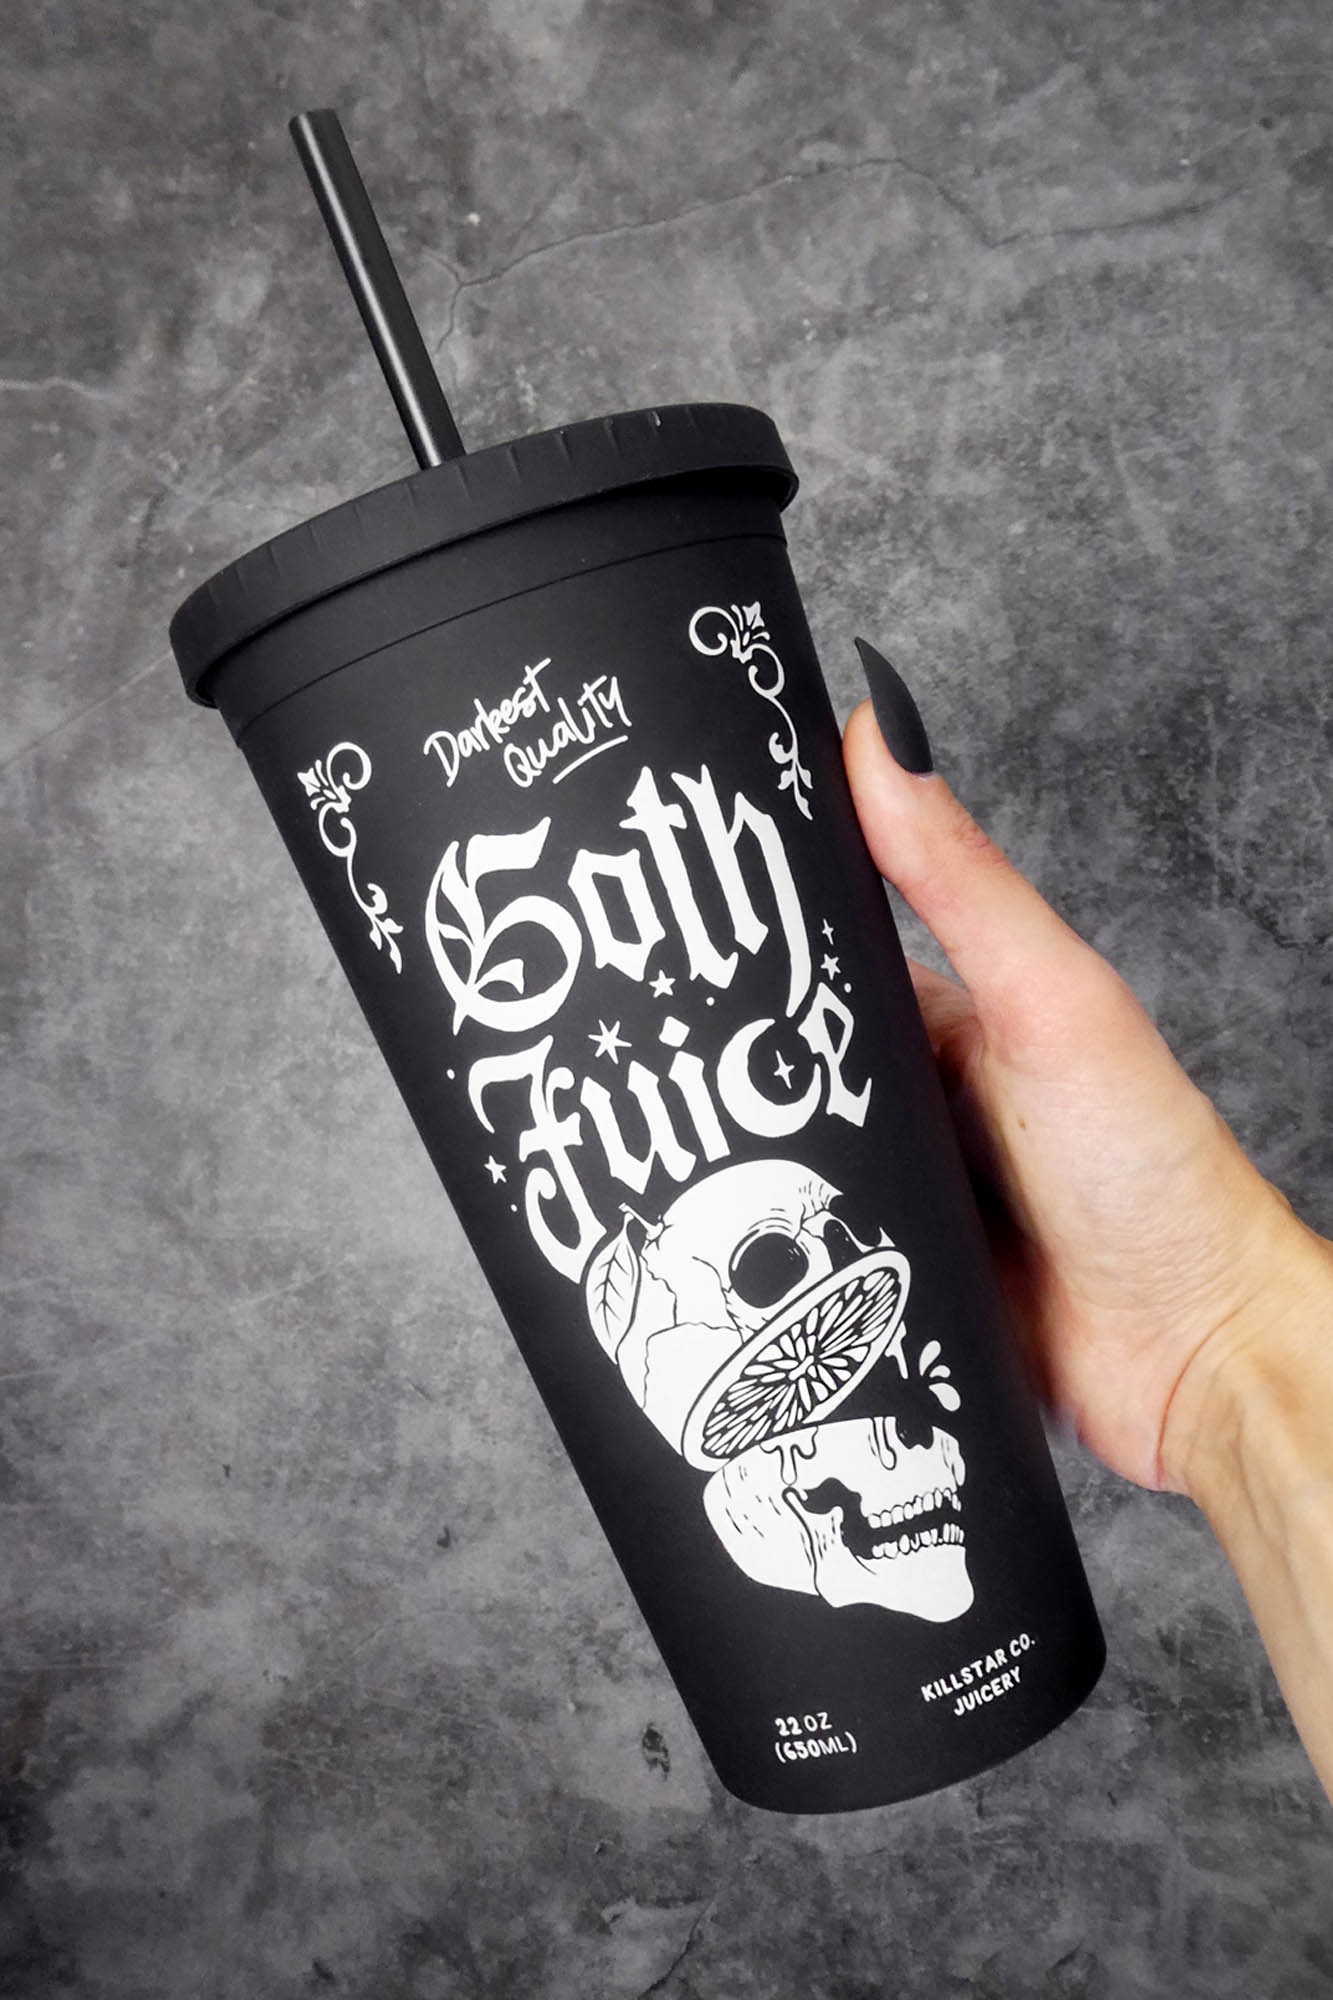 Skull Tumbler with Lid and Straw Goth Tumbler Skull Coffee Mug, 20 oz  Halloween Gothic Tumbler Water bottle Cup , Goth Travel Mugs, Skull Decor  Gifts